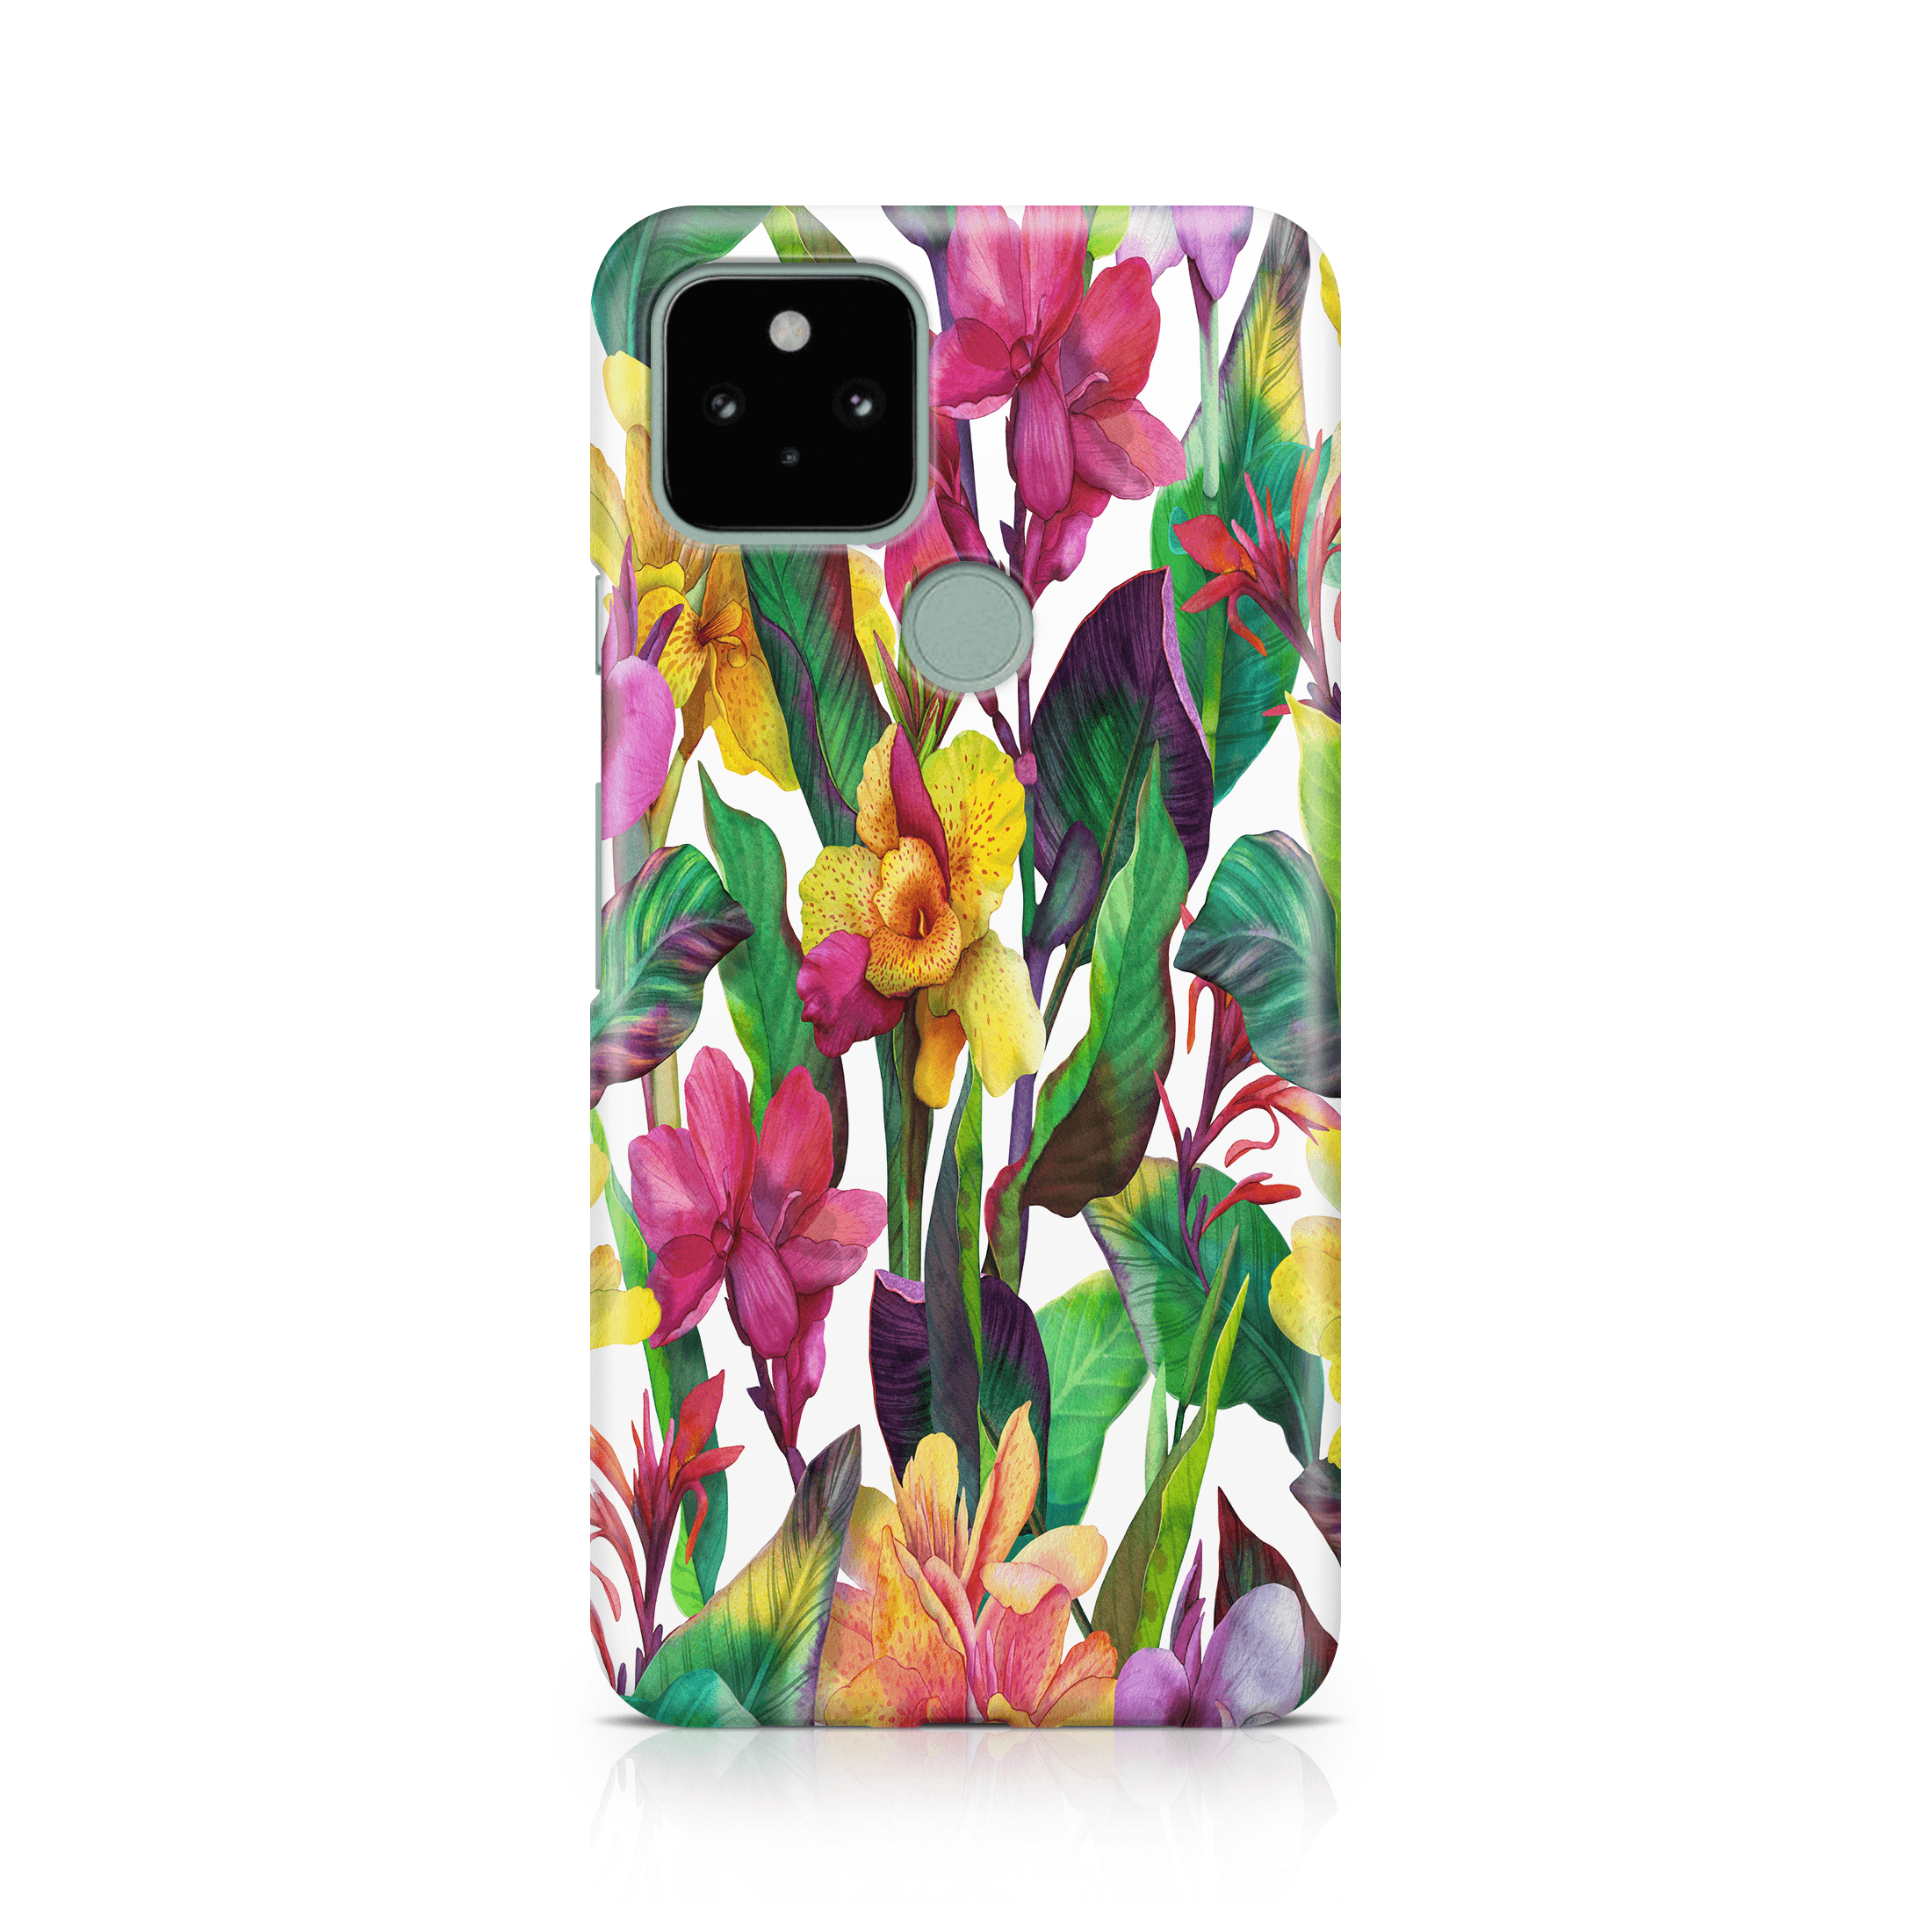 Canna Lily - Google phone case designs by CaseSwagger